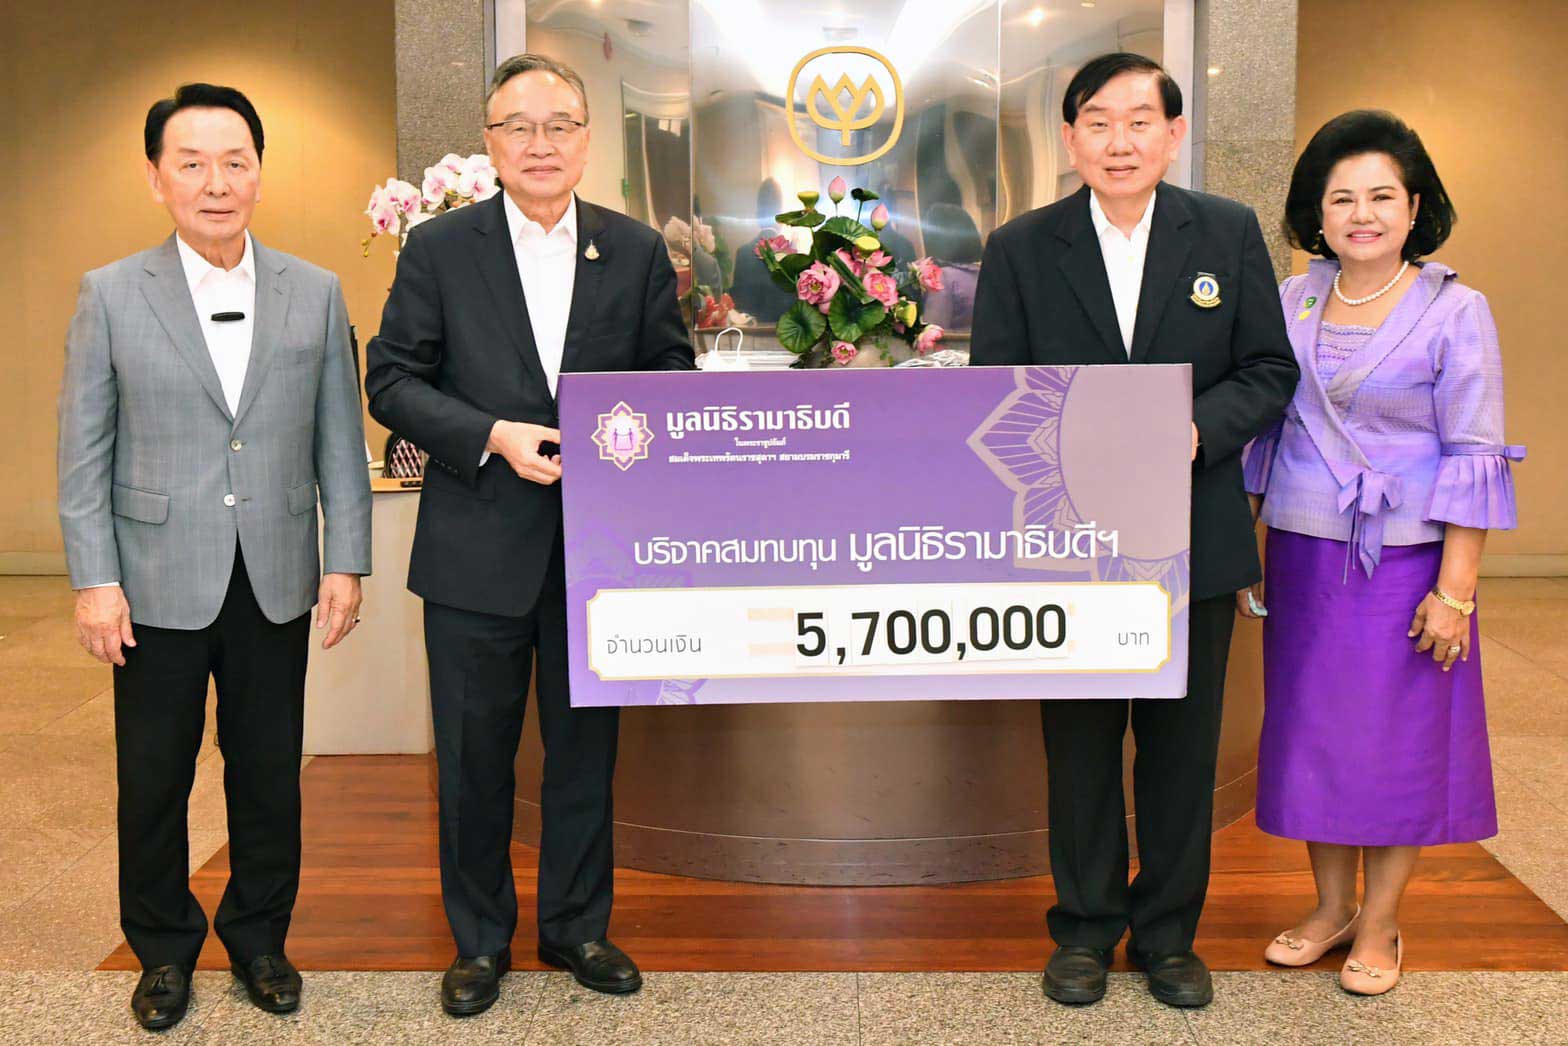 CPF supports Ramathibodi Hospital with fund for purchasing medical equipment